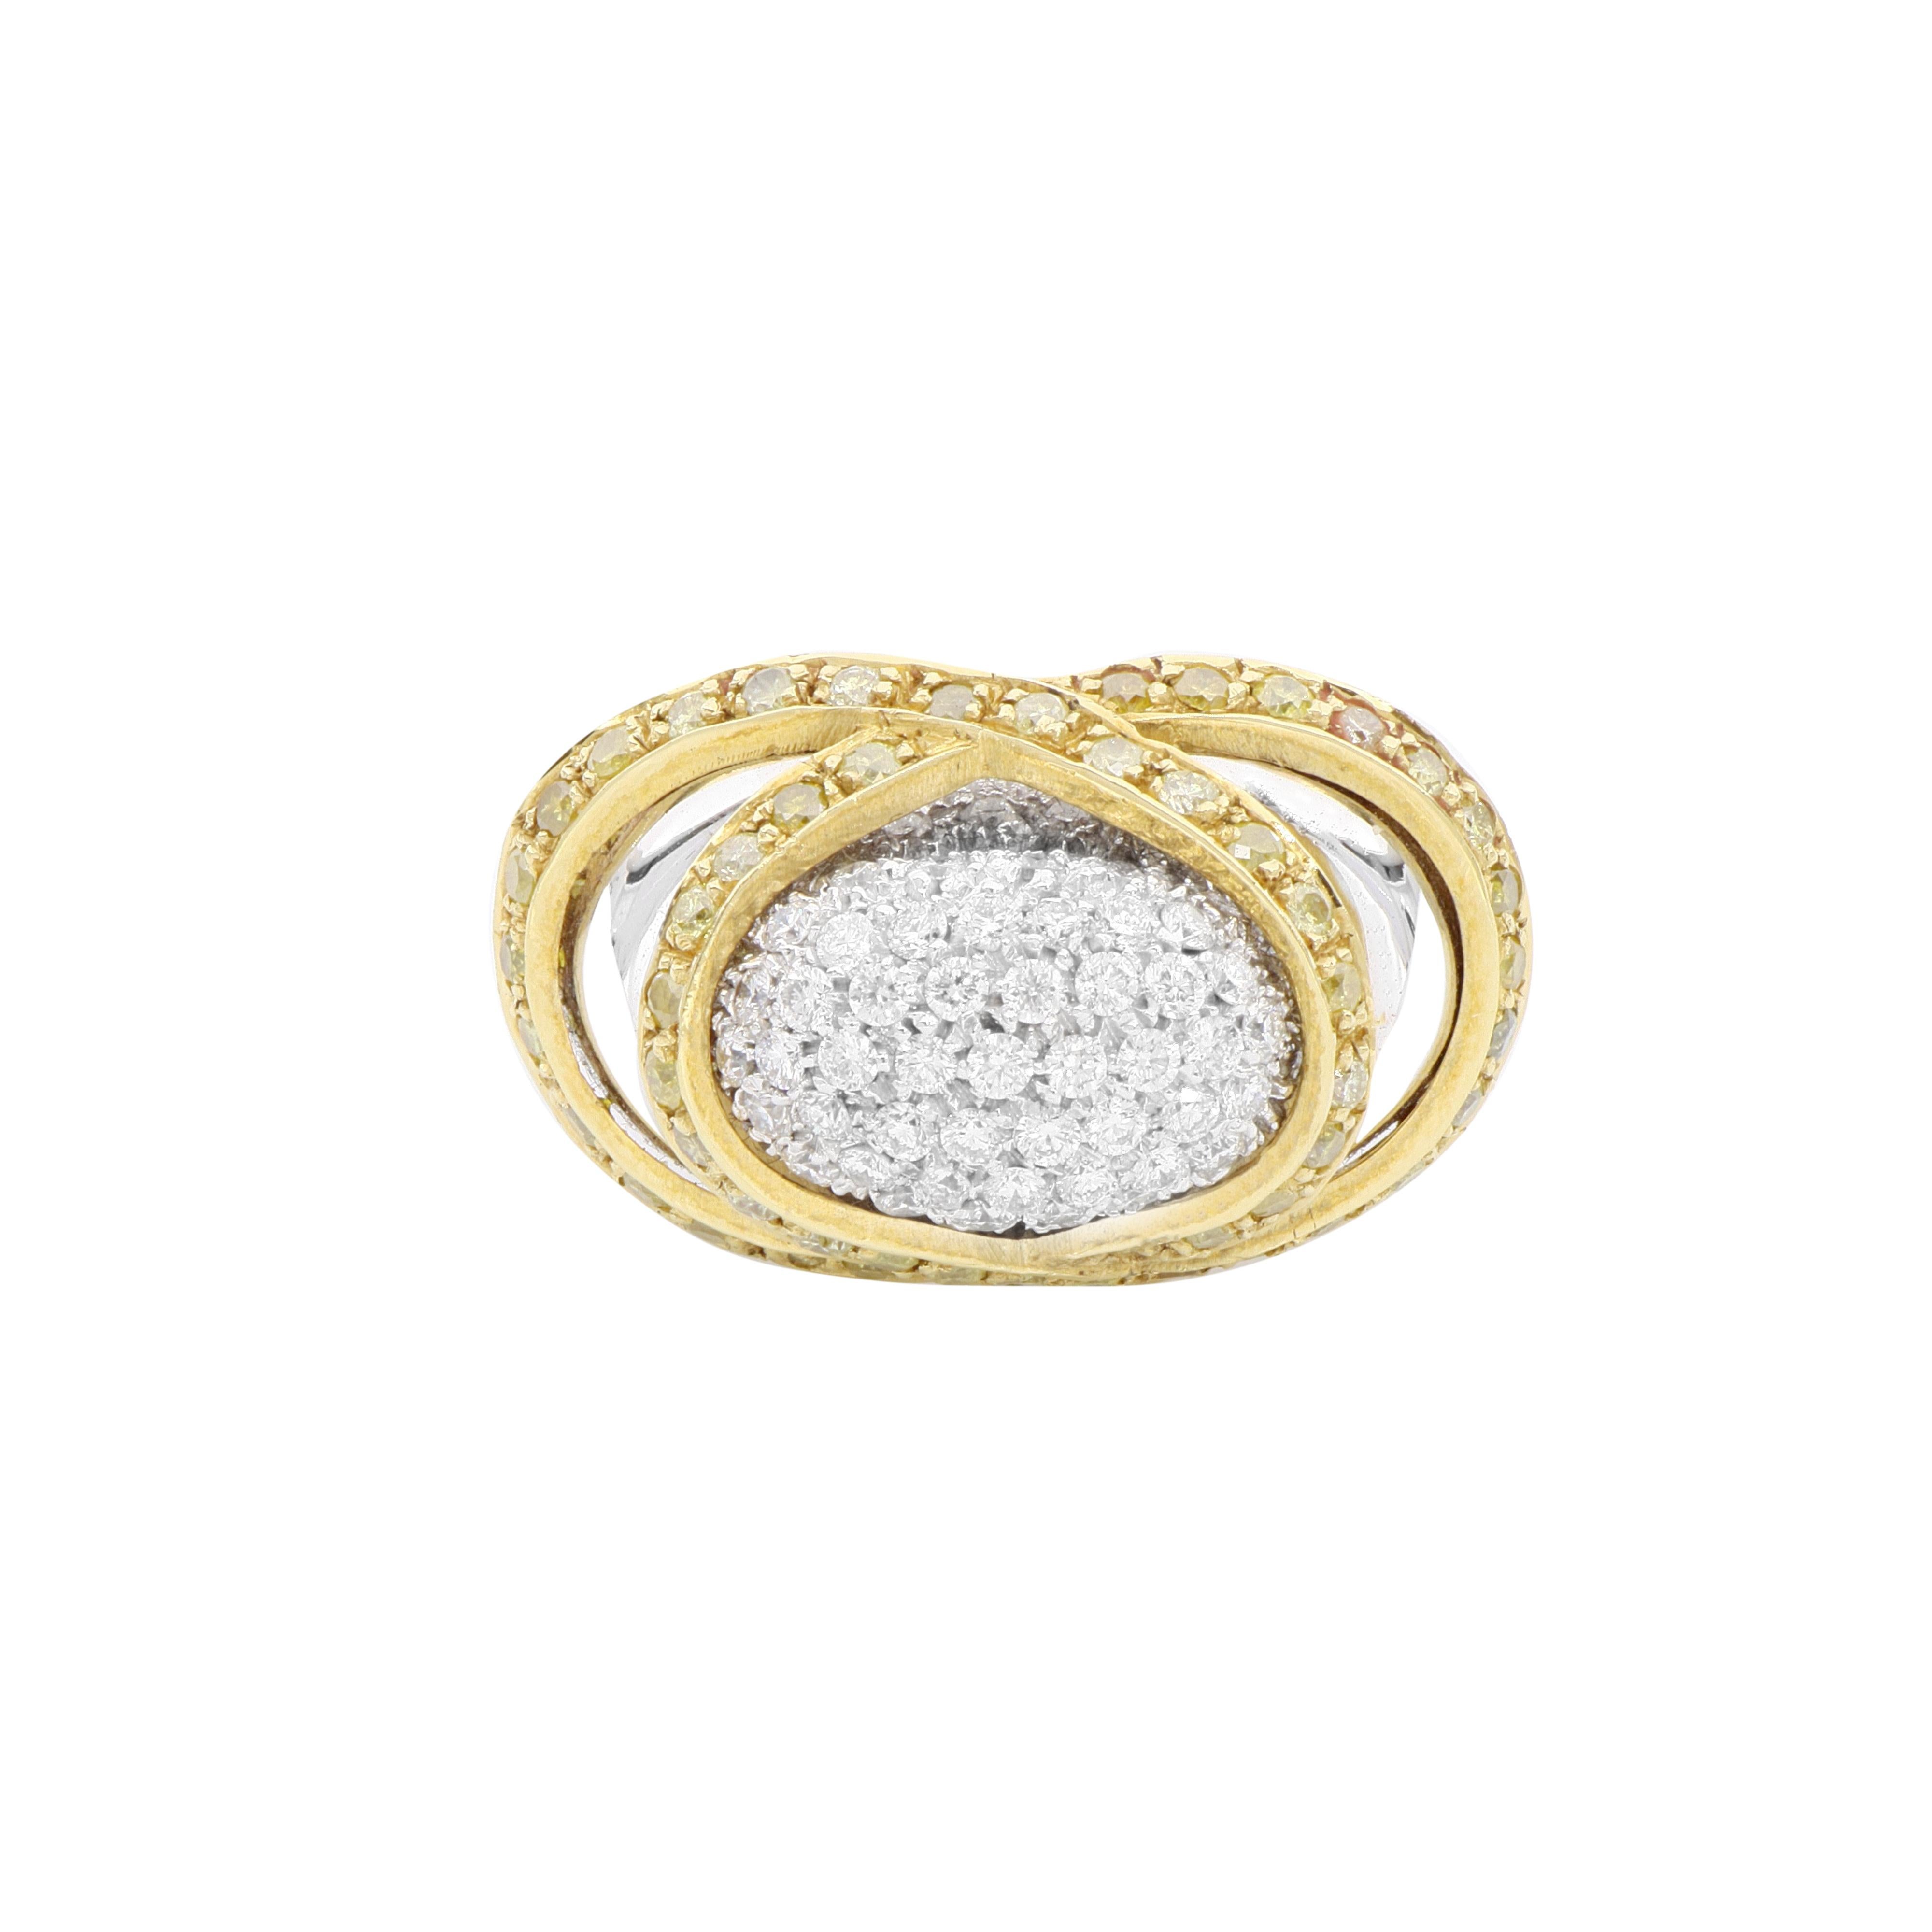 For Sale:  Fancy and colorless diamonds pavè engagement wedding ring 4